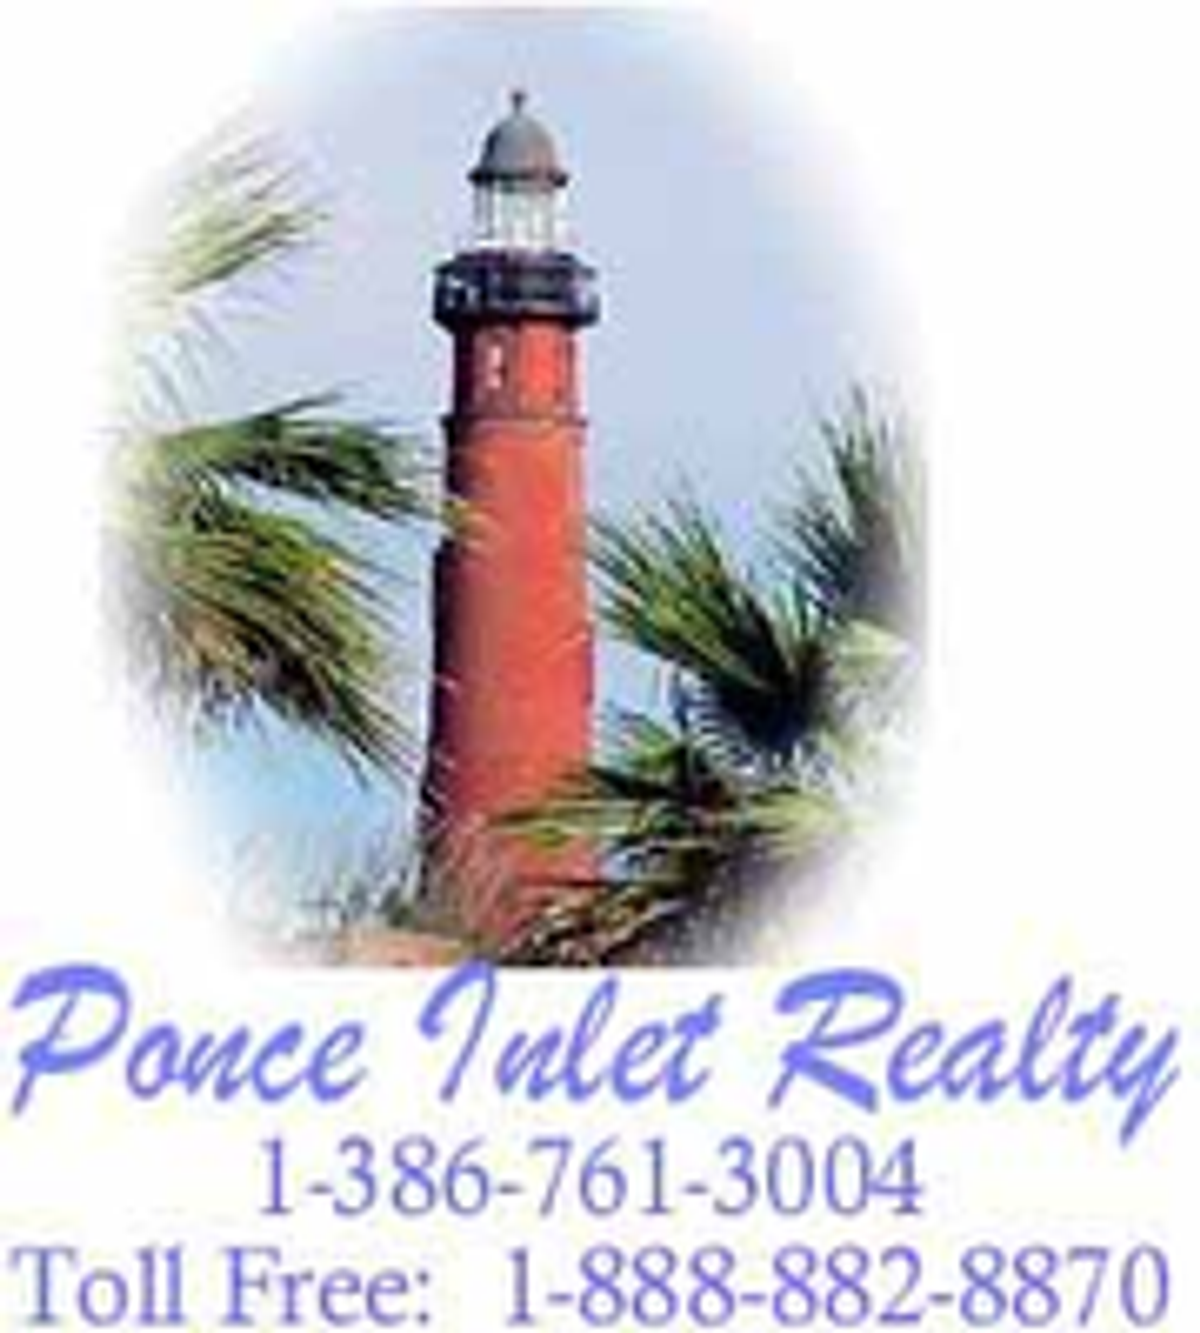 Photo for Johnny K. Kasianowicz, Listing Agent at Ponce Inlet Realty, Inc